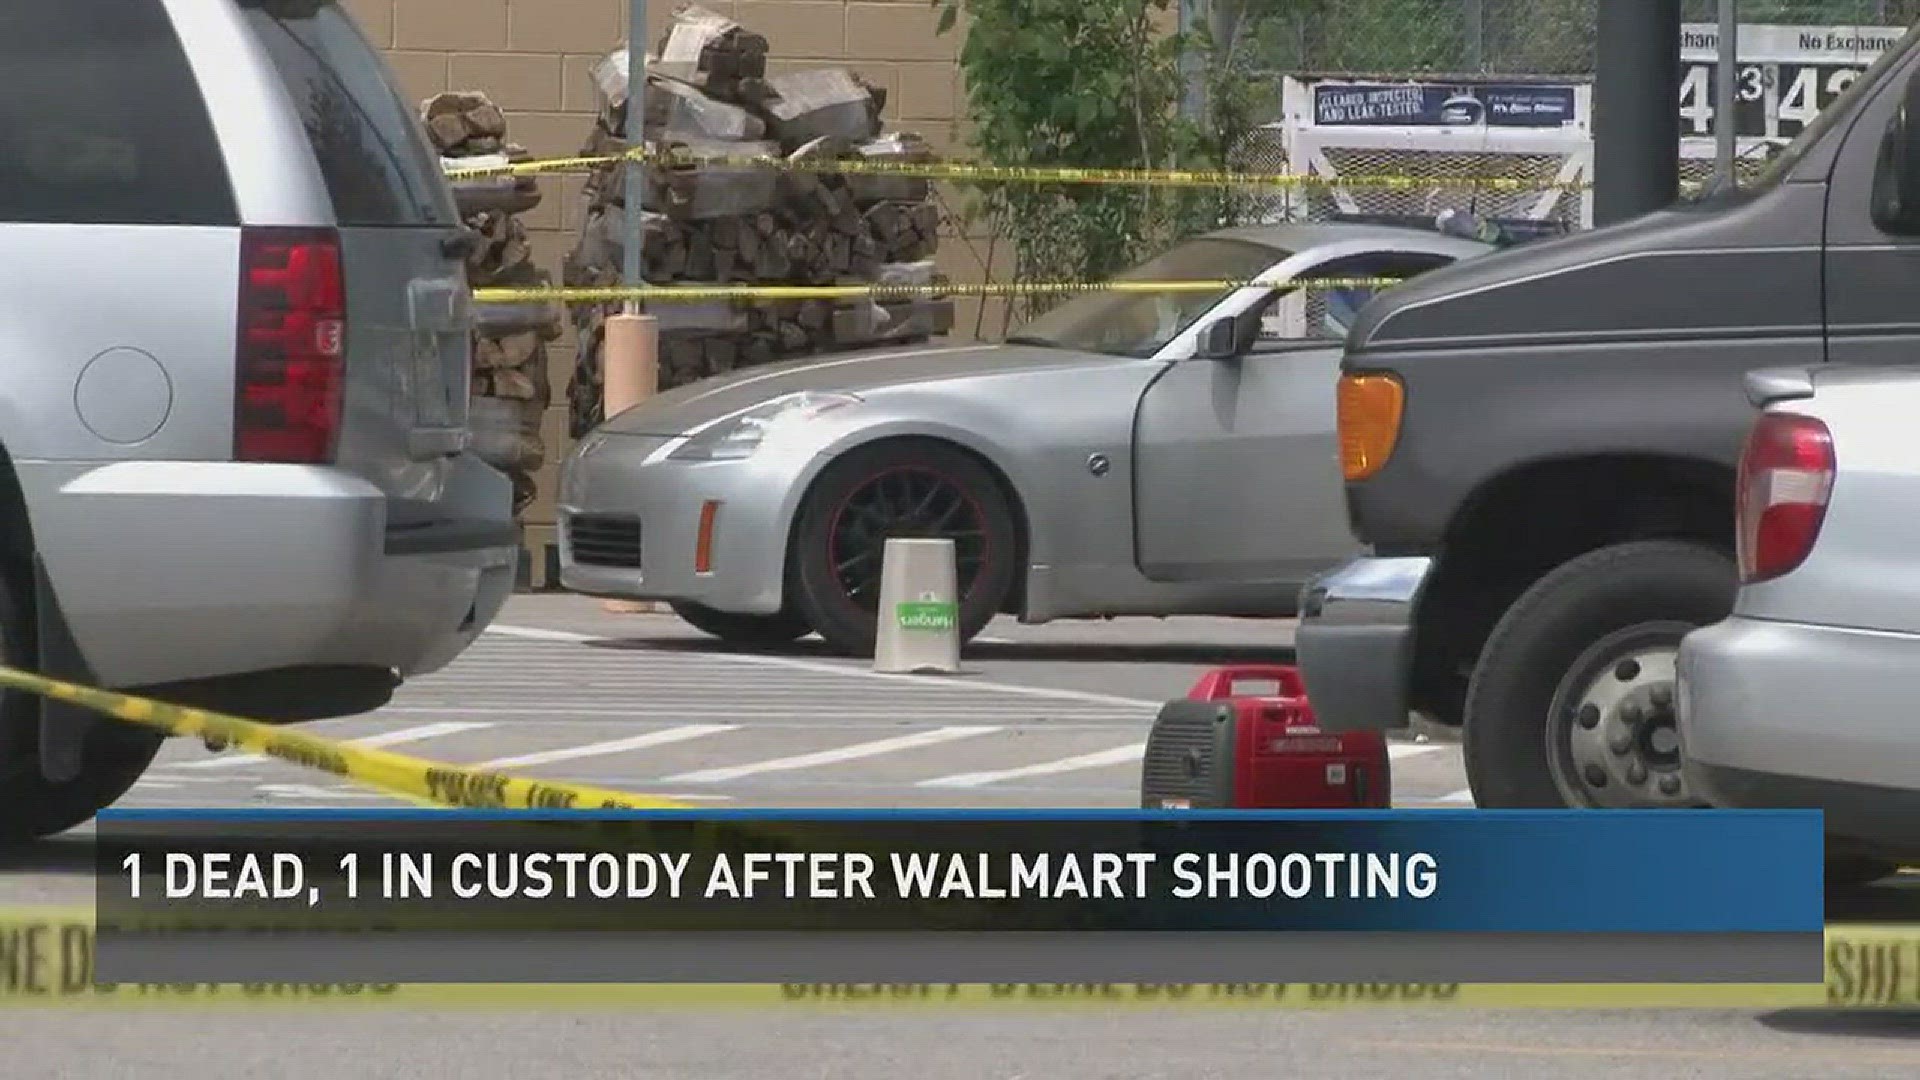 Police have confirmed a Grainger County man is dead after a shooting in a Walmart parking lot in Clinton, Tennessee. (4/28/17 5PM)